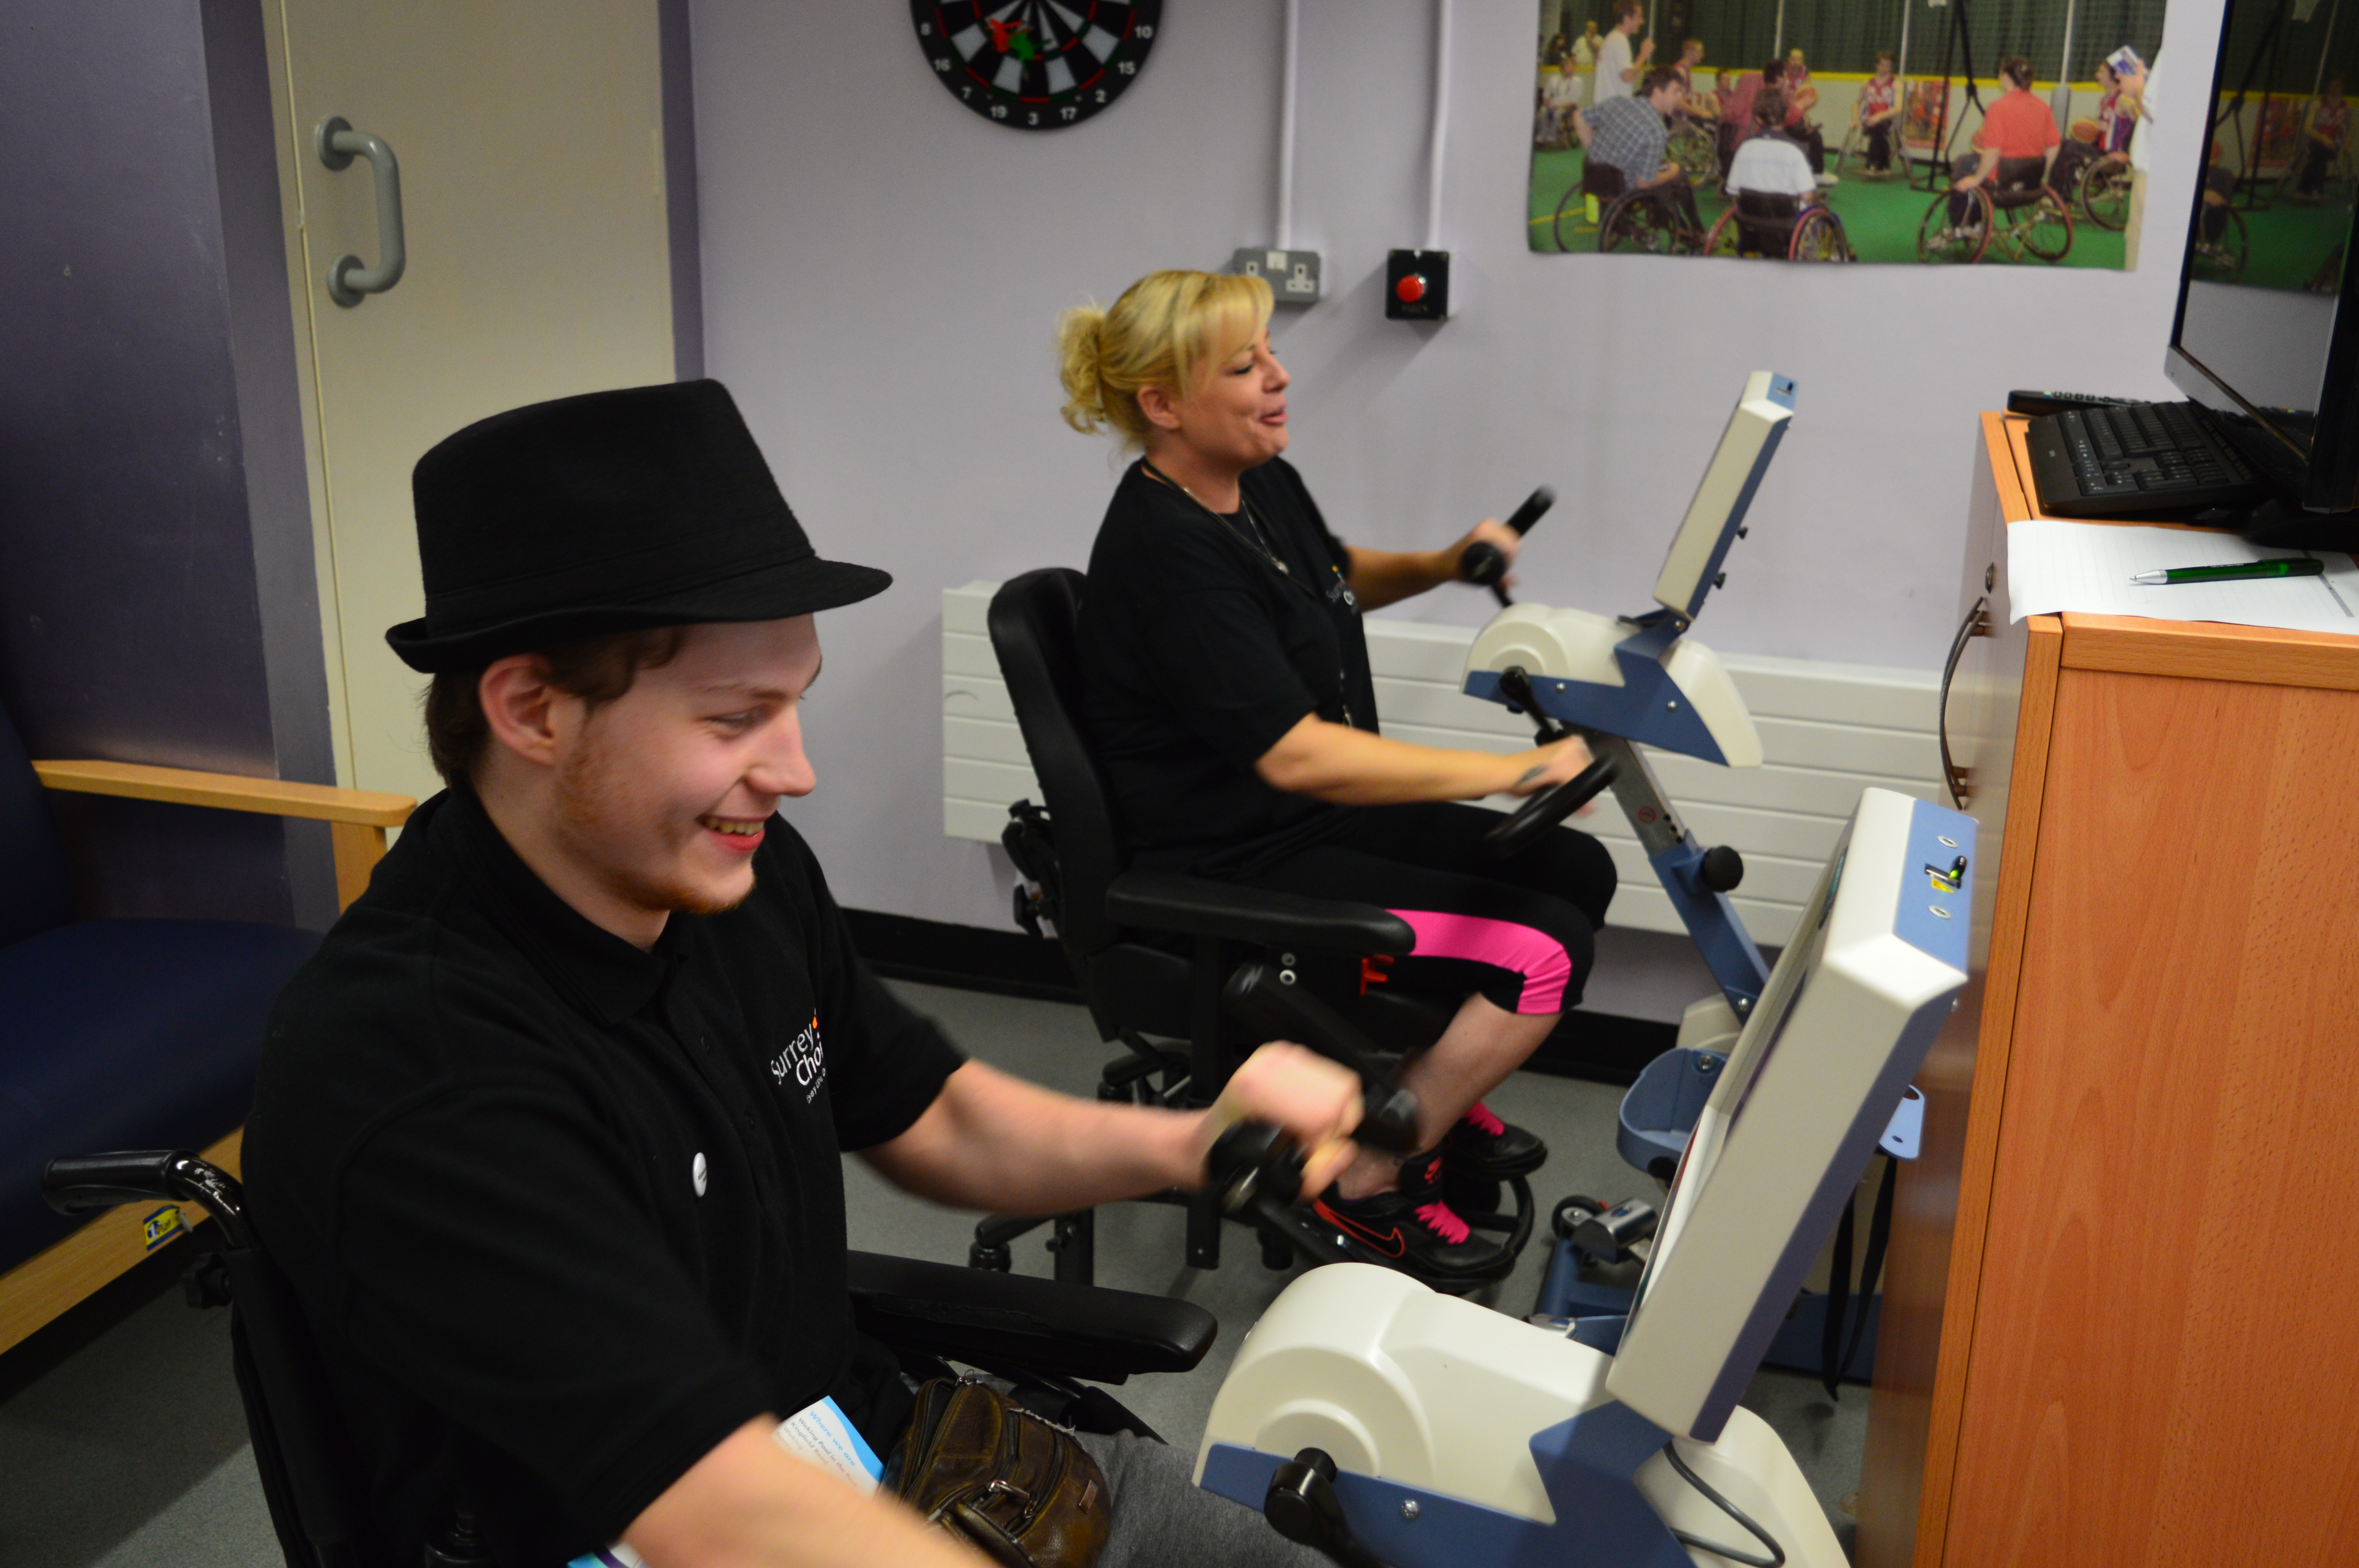 Anton working out on hand bicycle gym equipment with a colleague from Surrey Choices